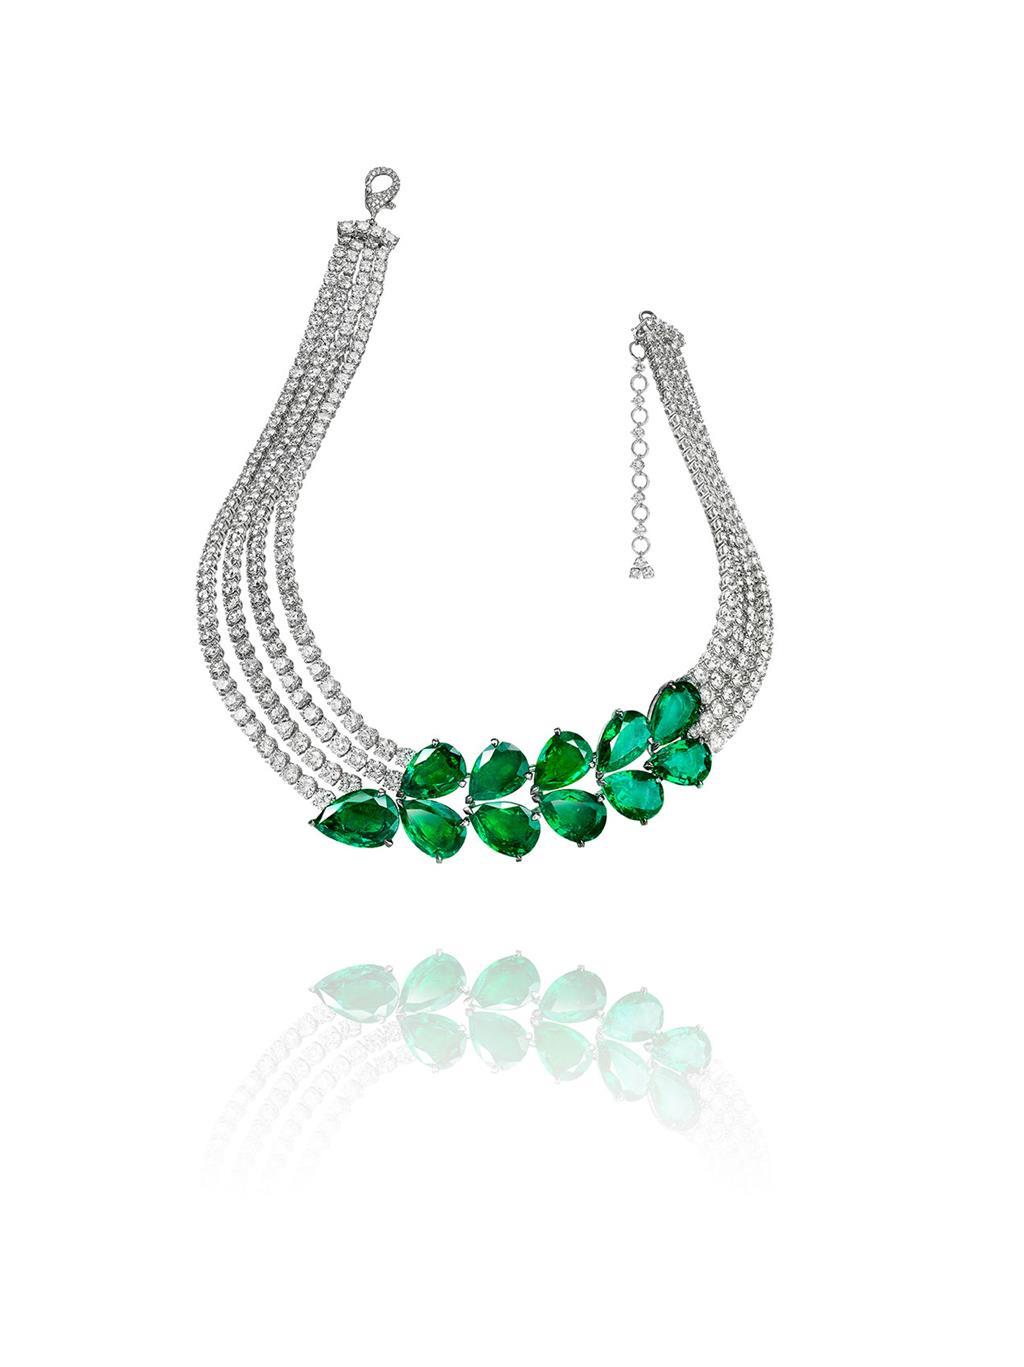 Necklace "Le Printemps" - White gold set with 11 pear-shaped emeralds and 395 diamonds